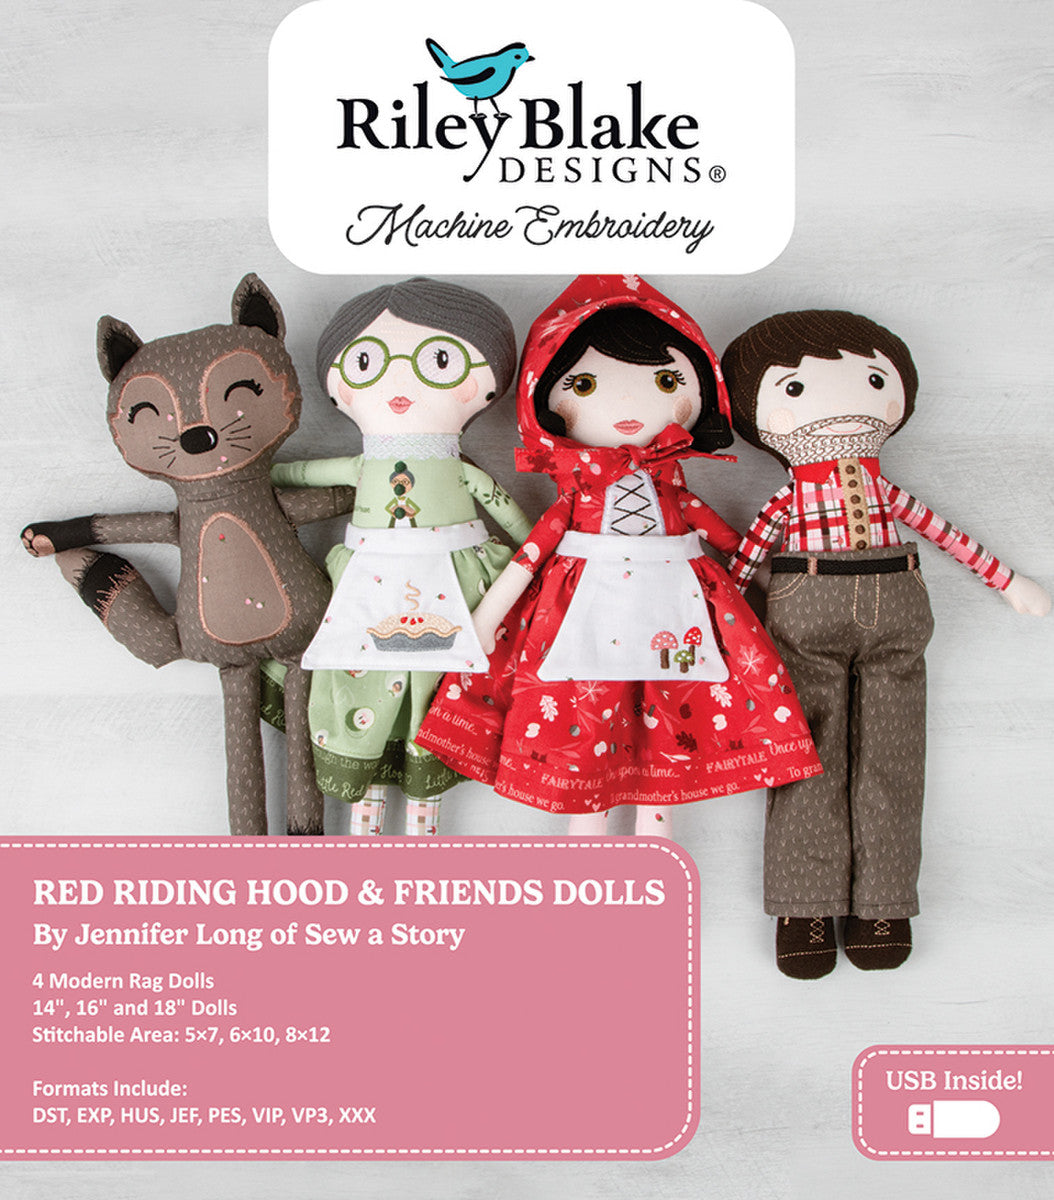 Red Riding Hood & Friends Dolls Machine Embroidery USB by Jennifer Long | Riley Blake Designs front cover